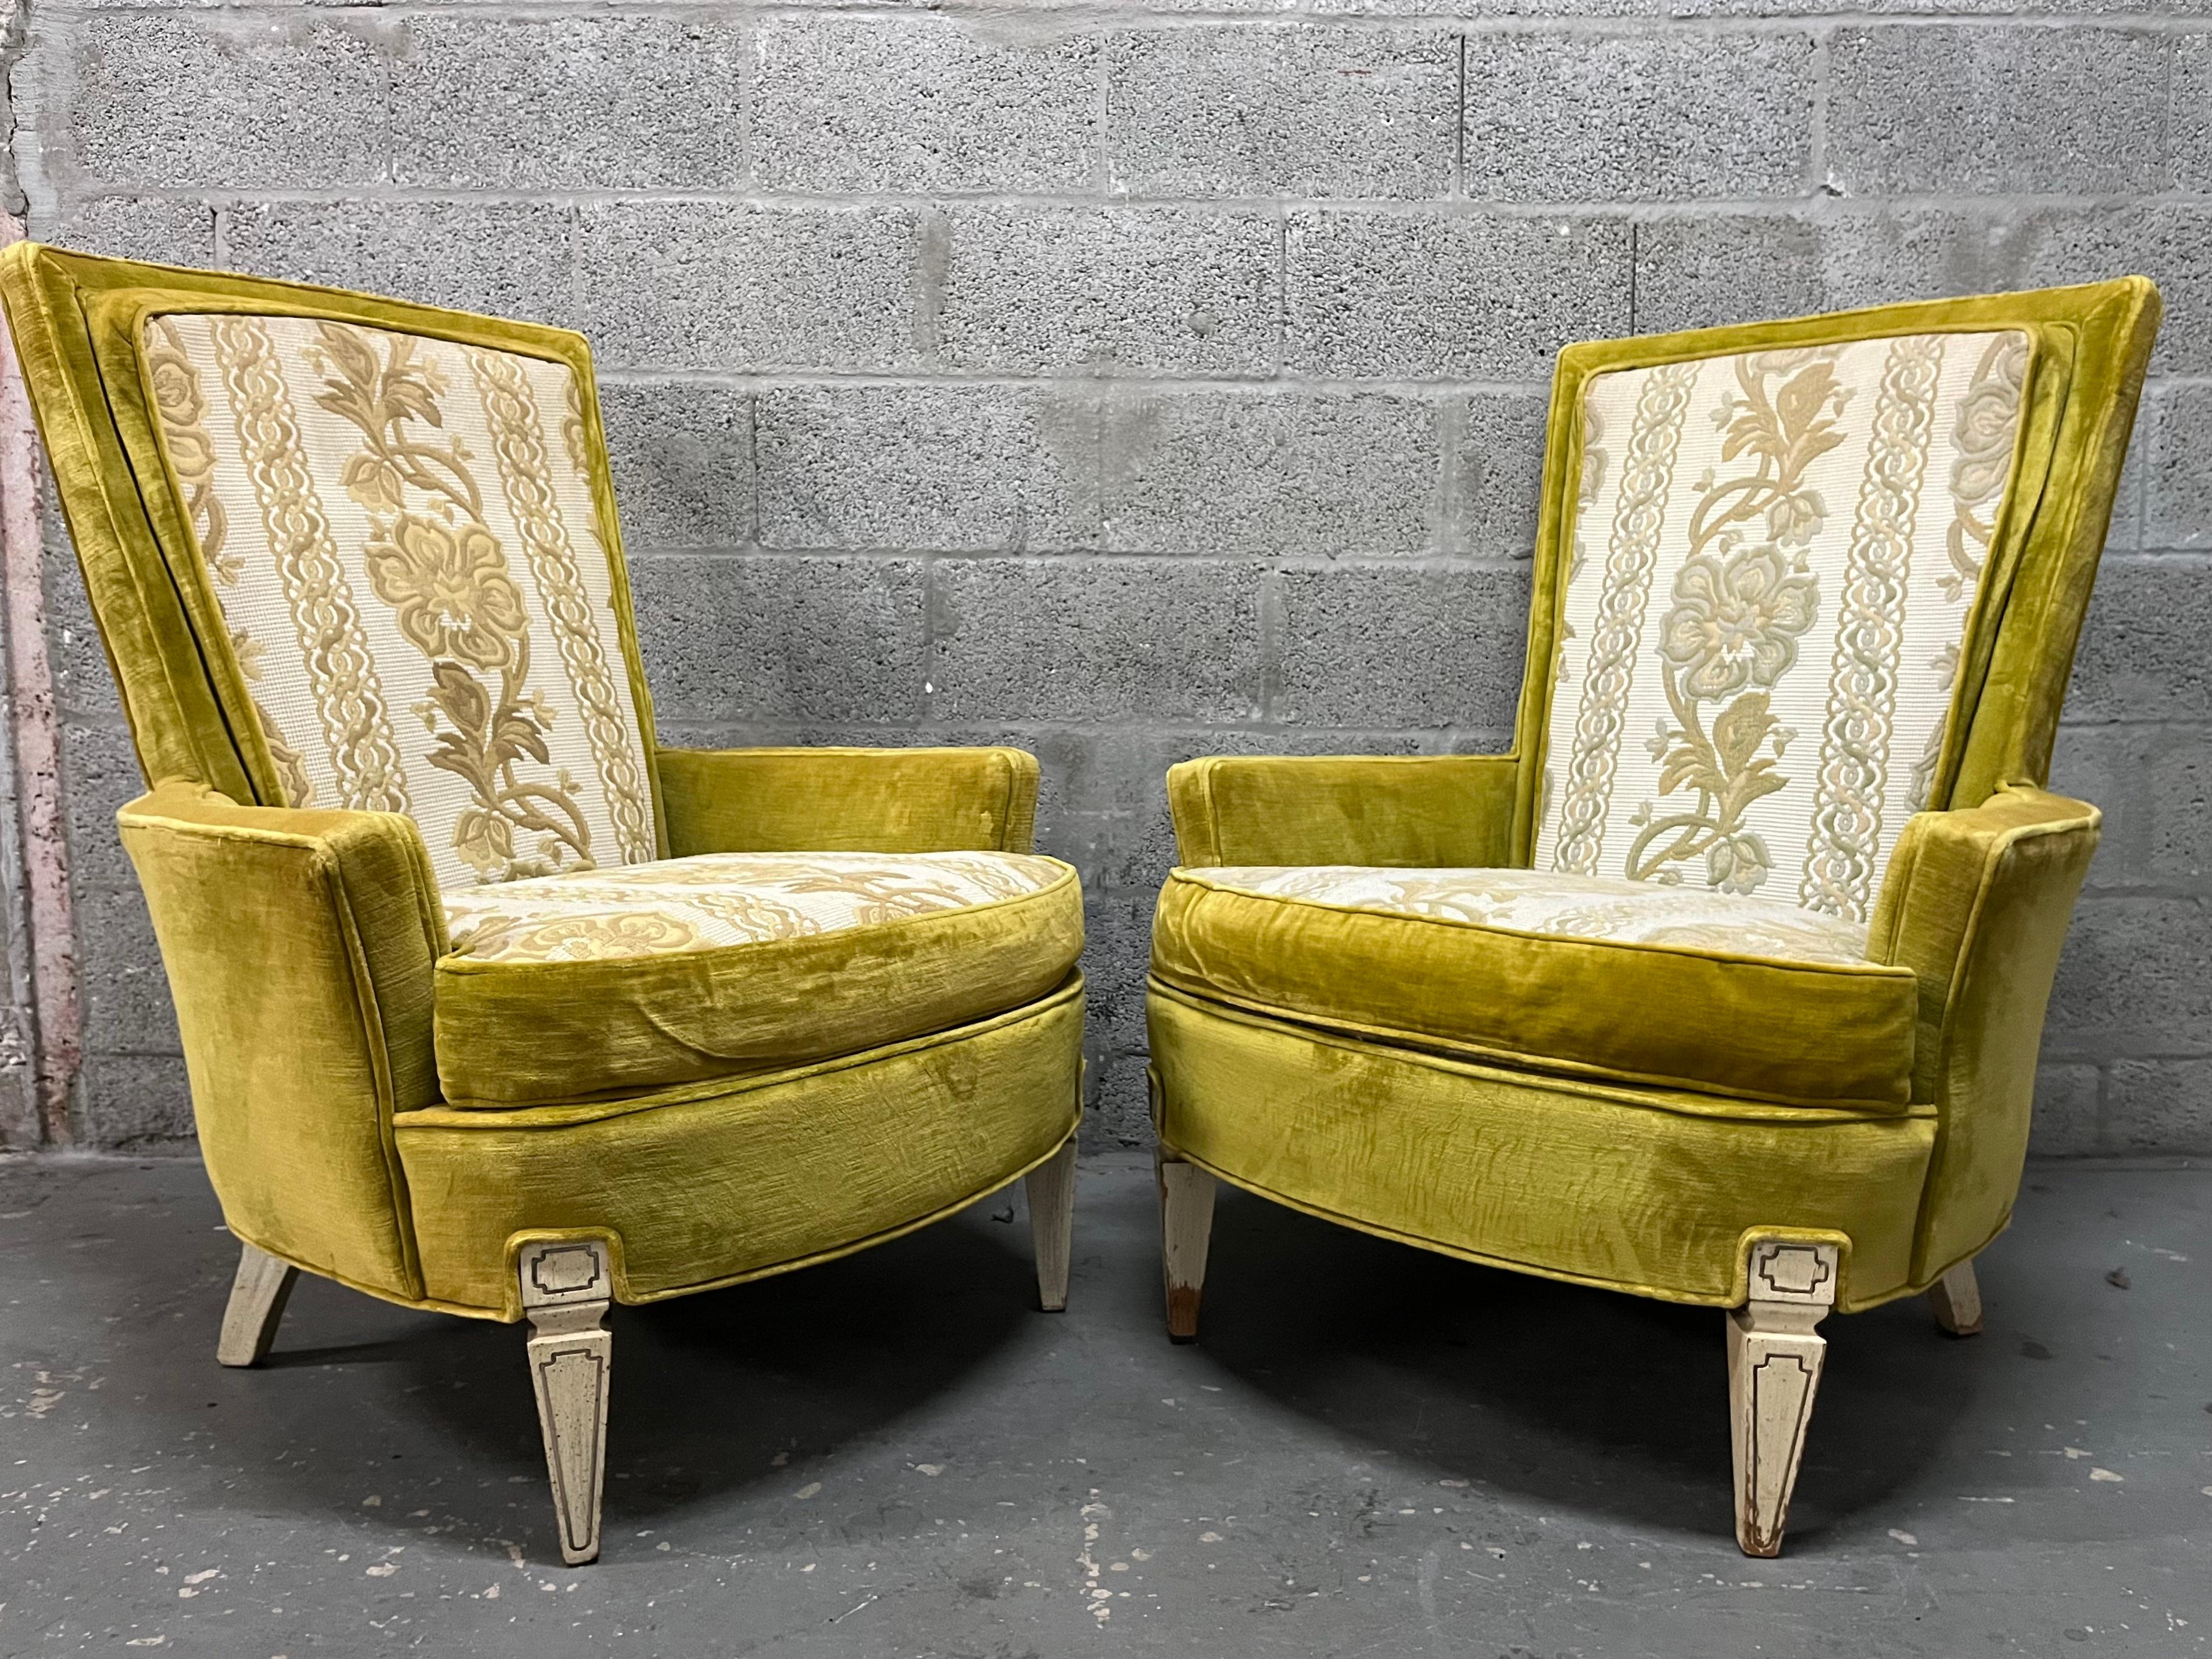 A Pair of Vintage Mid Century Modern / Hollywood Regency Upholstered Lounge Chairs  Silver Craft Furniture Co.. Circa 1960s
Feature the original velvet lemon grass upholstery, with floral embroidered details back and seat cushions.
Please notice